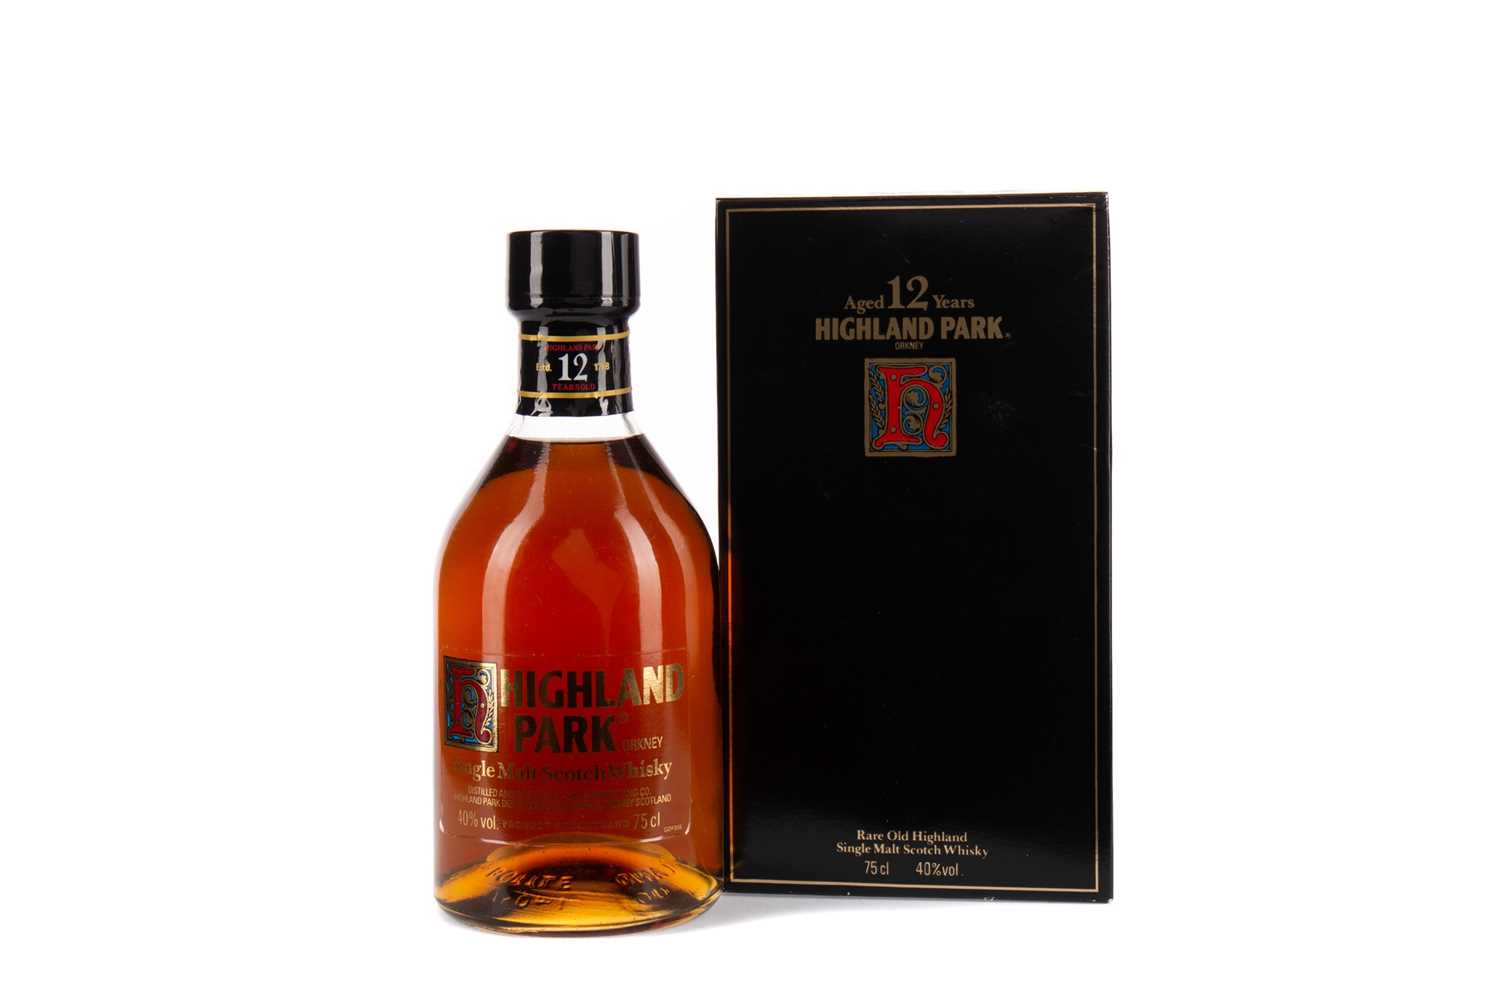 Lot 127 - HIGHLAND PARK AGED 12 YEARS